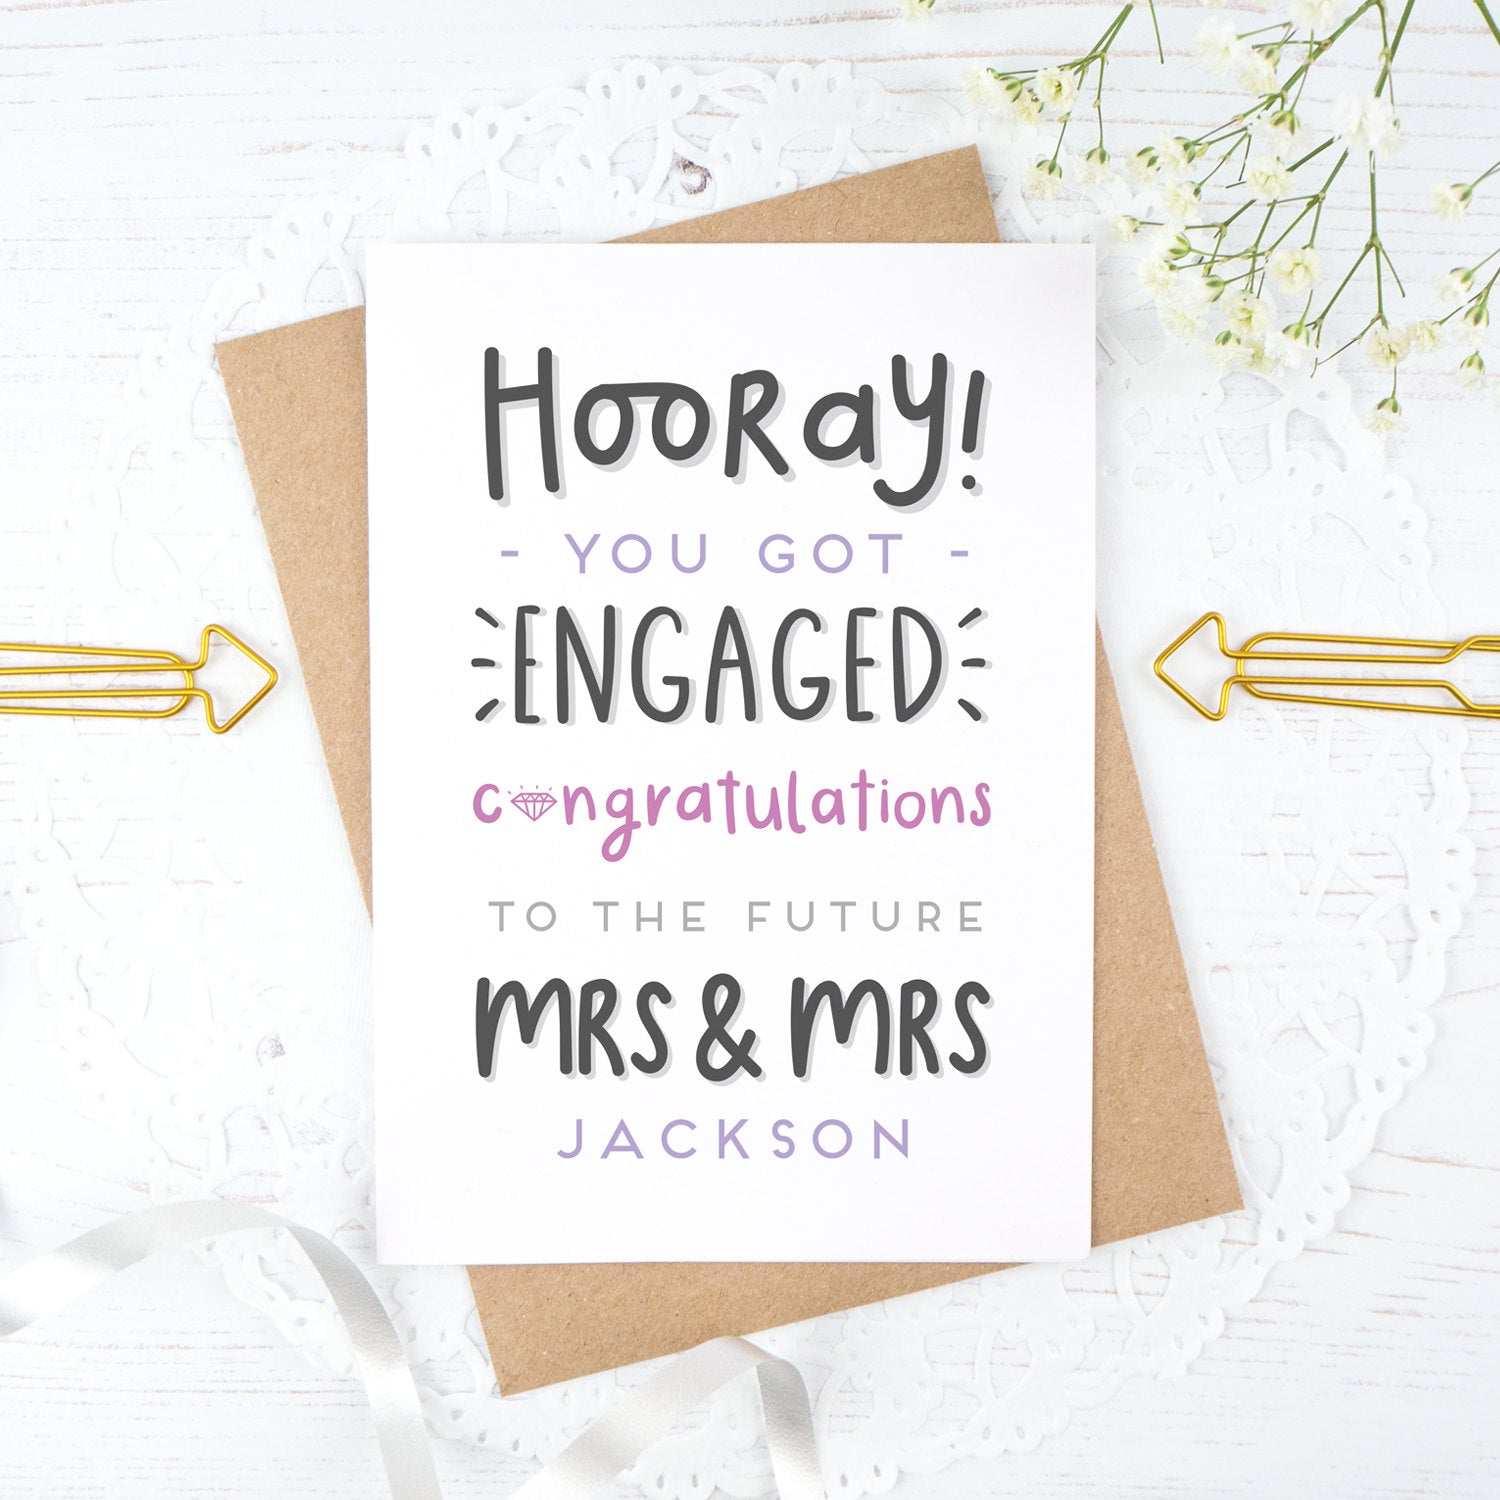 Hooray you got engaged! - Personalised Mrs & Mrs engagement card in purple